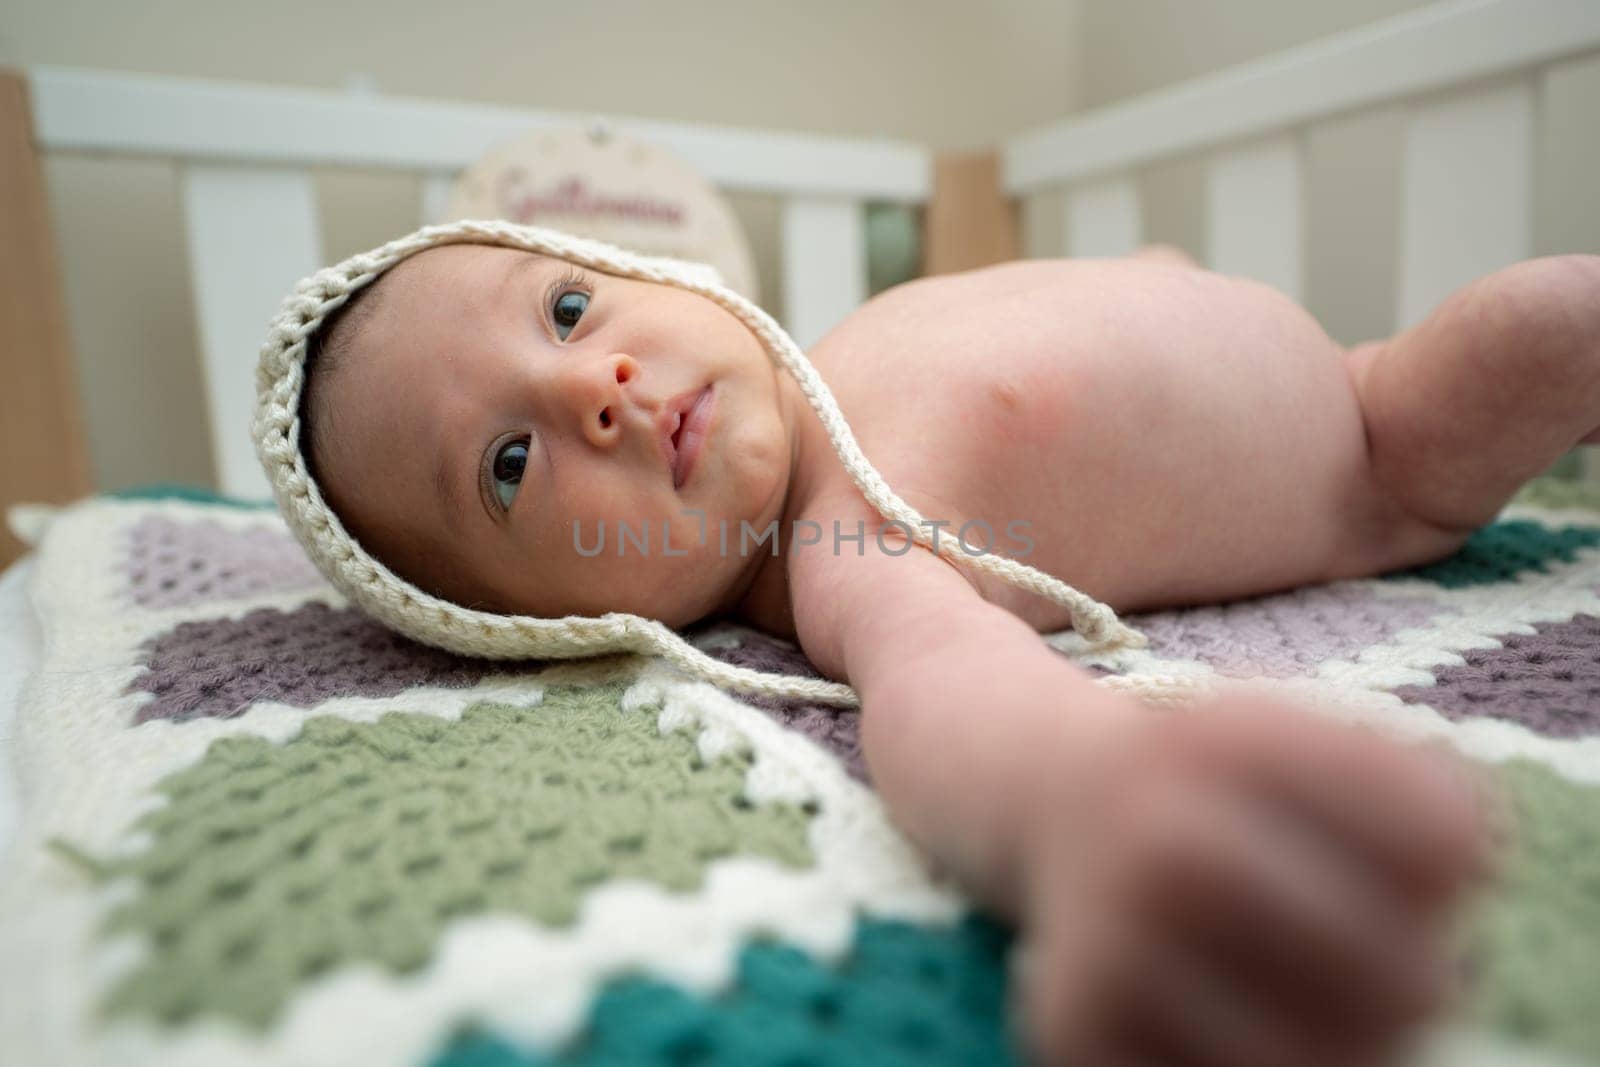 Baby with two months of life in his crib with a wool cap.